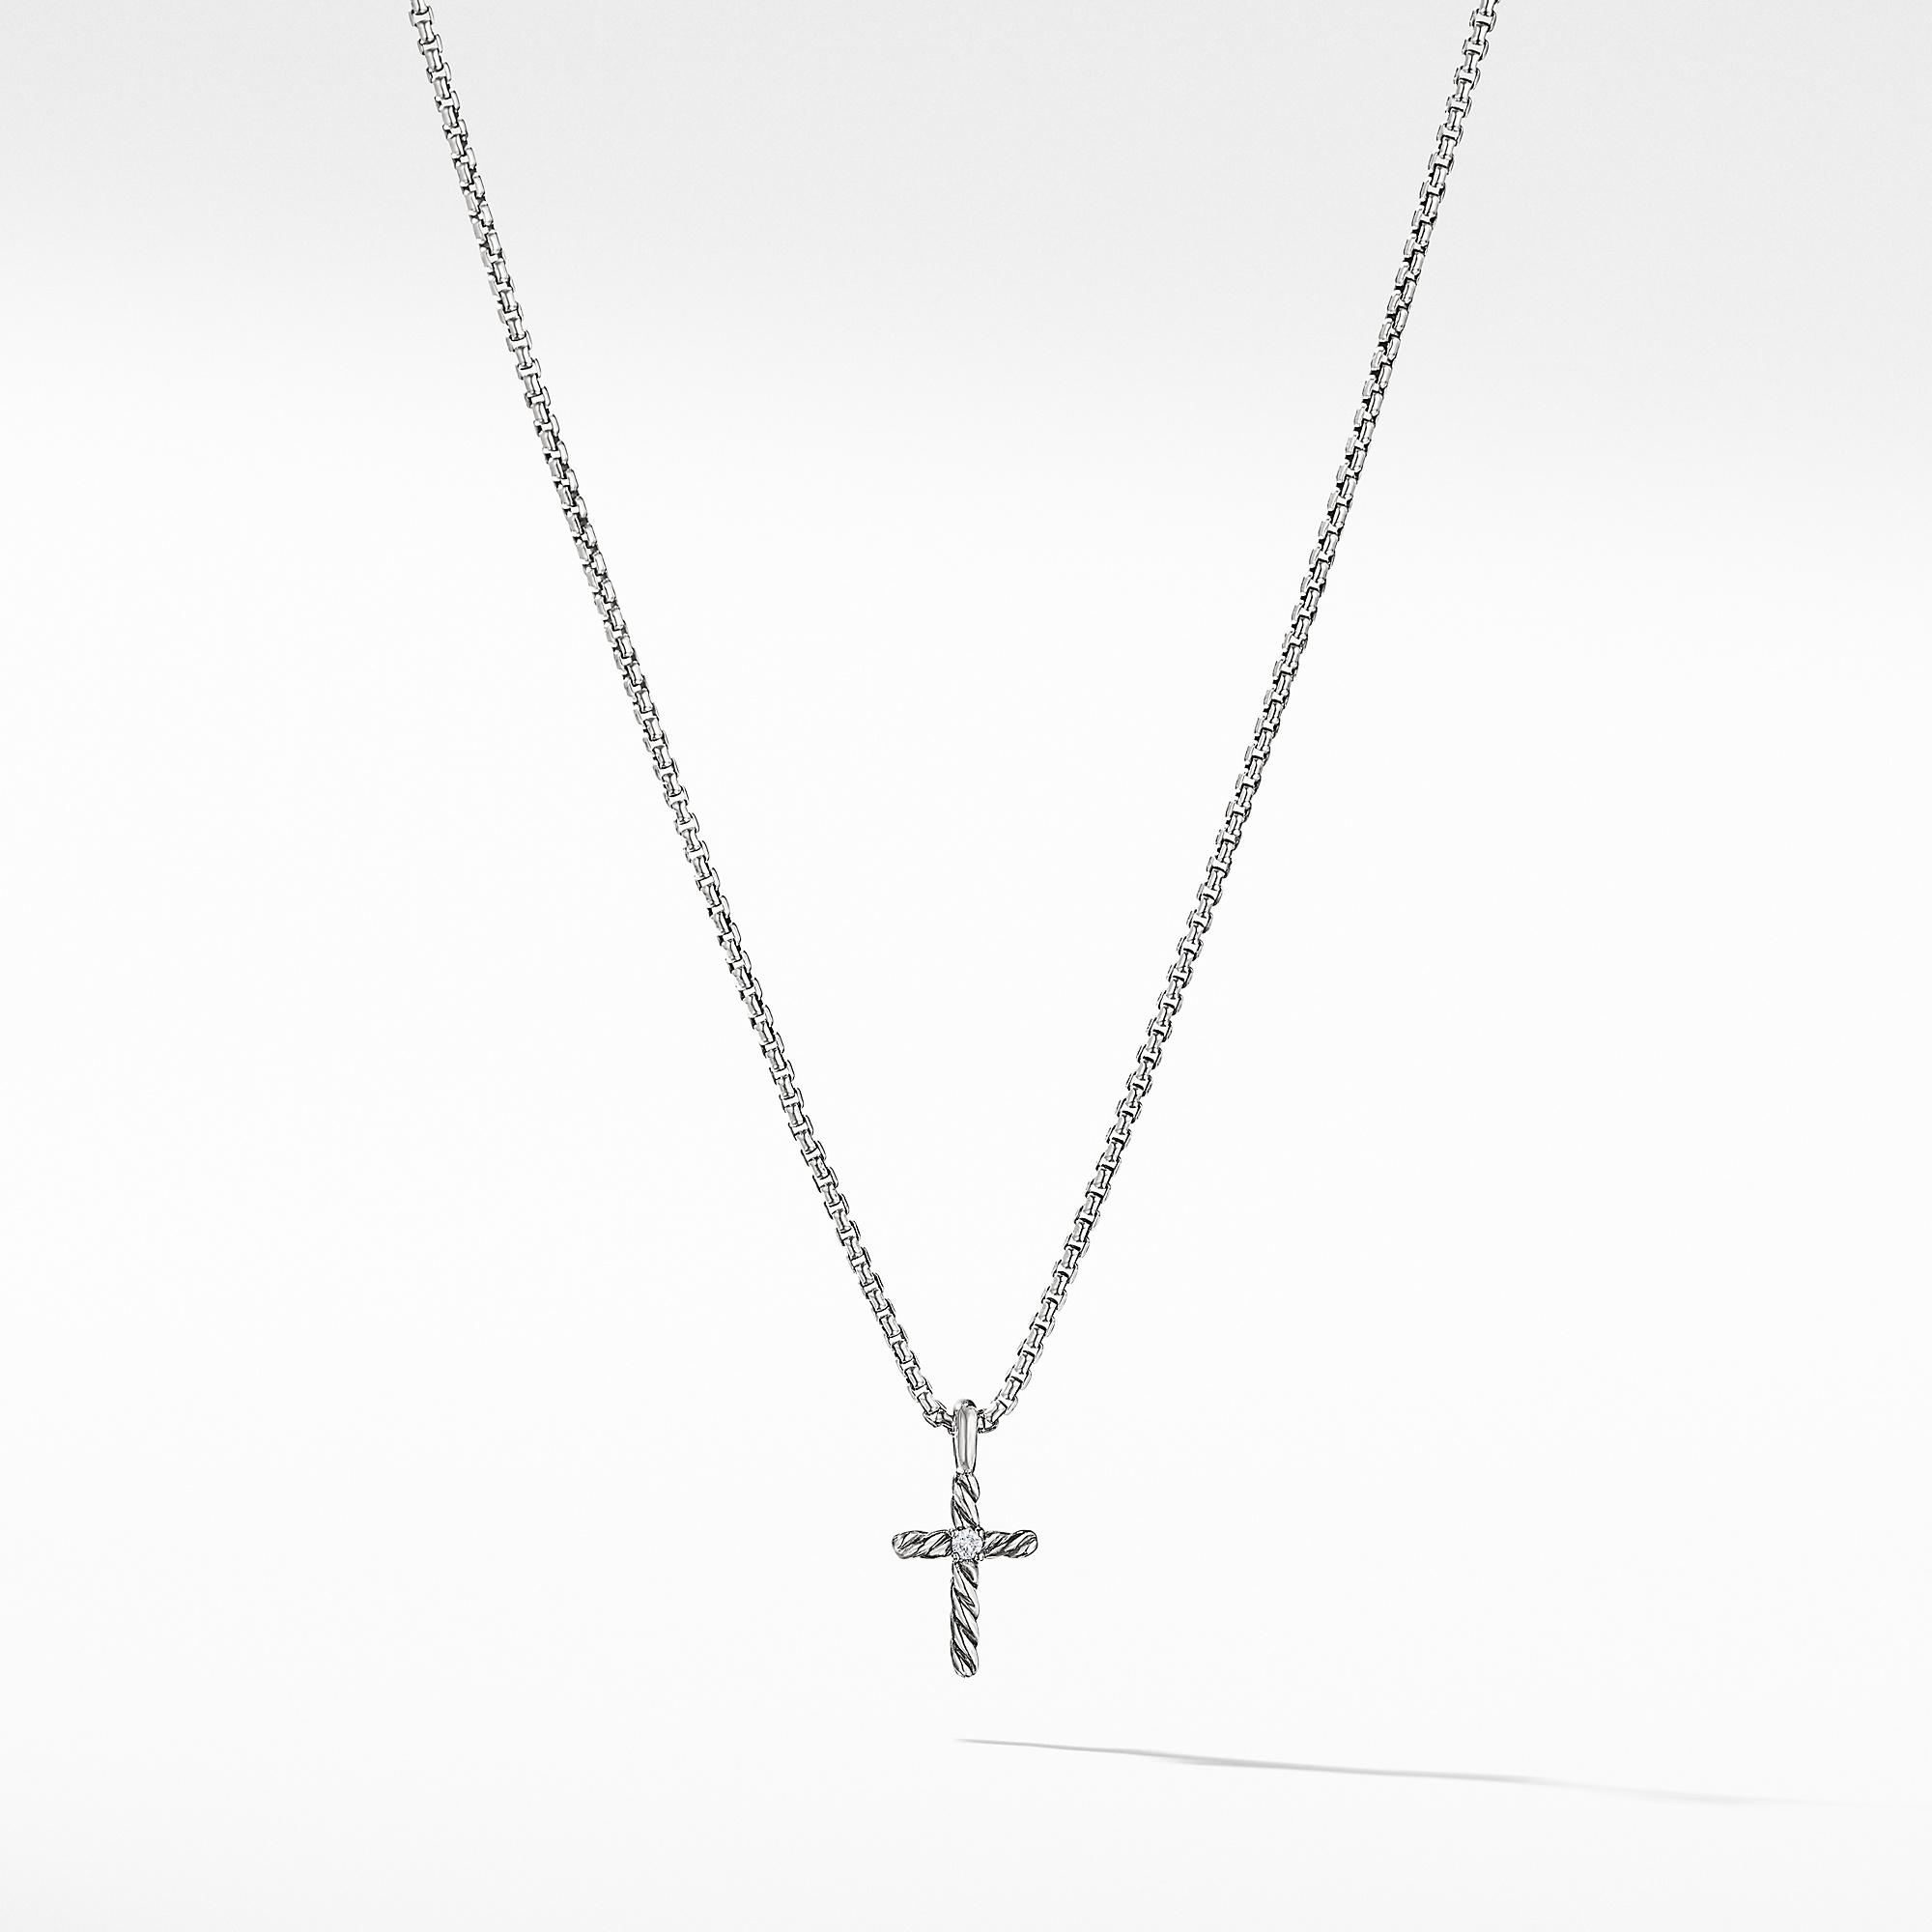 David Yurman Cable Collectibles Kid's Cross Necklace with Diamonds